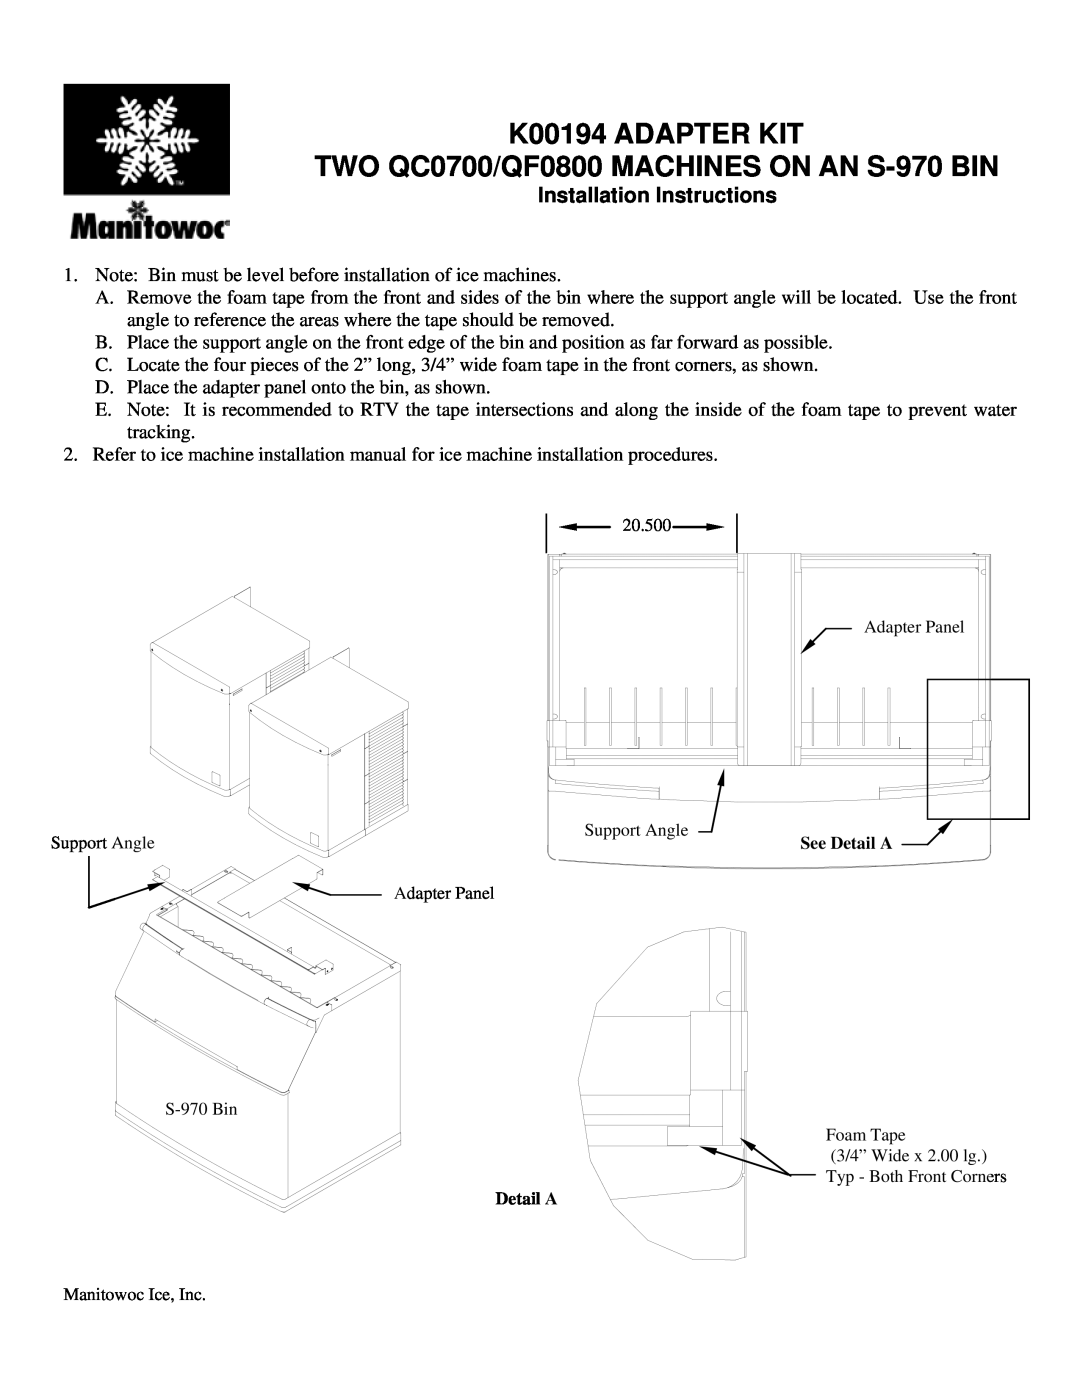 Manitowoc Ice installation instructions K00194 ADAPTER KIT, TWO QC0700/QF0800 MACHINES ON AN S-970BIN 